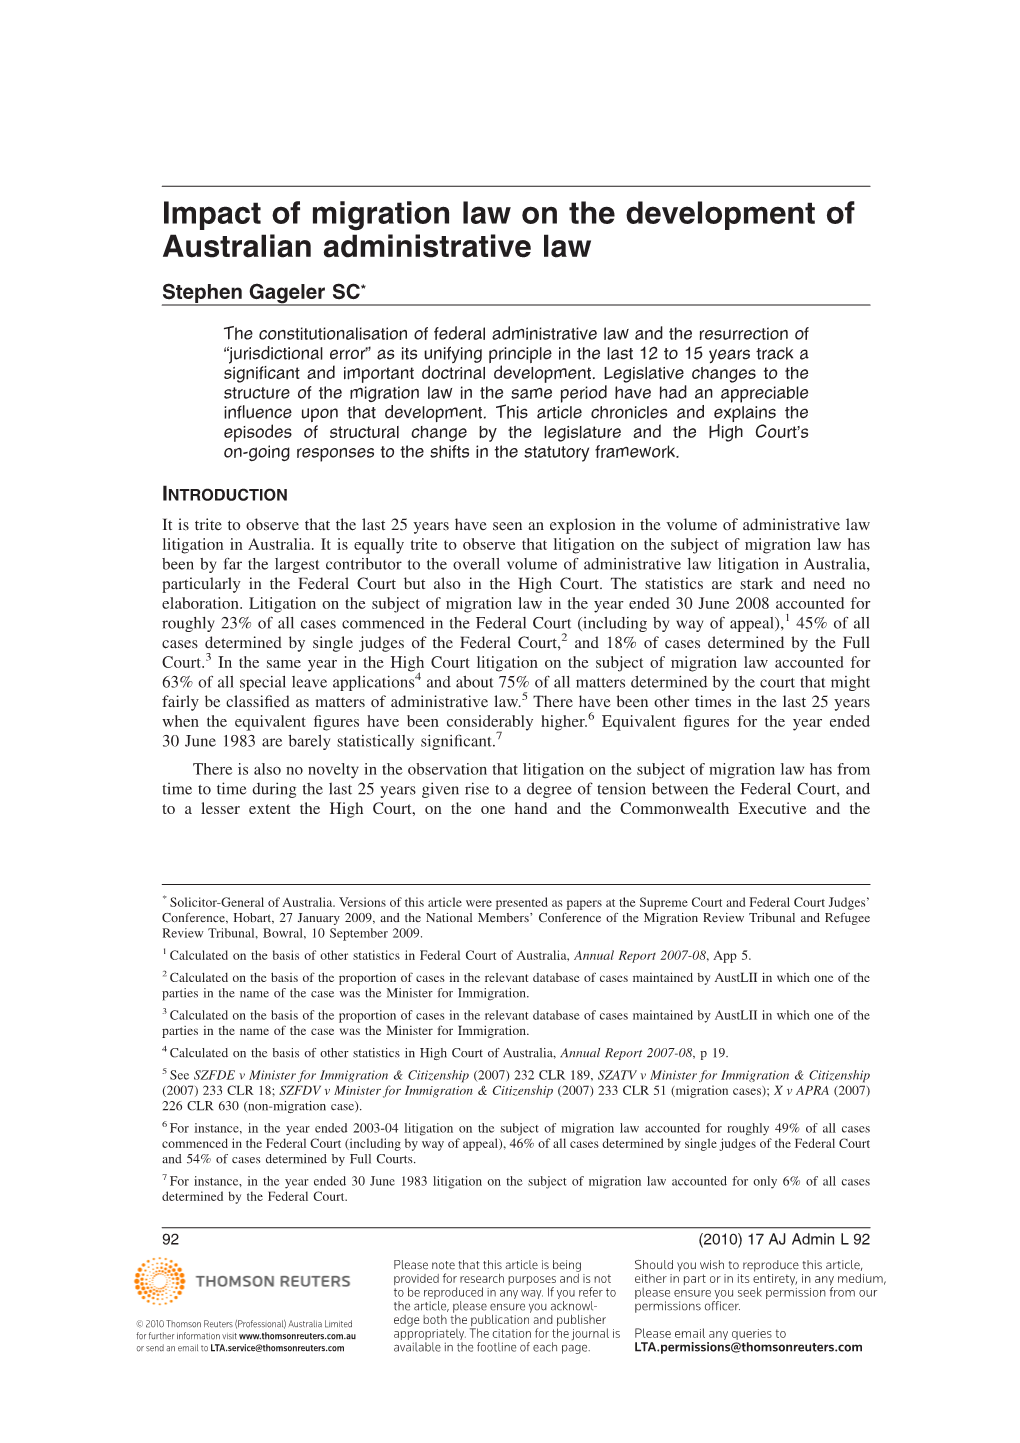 Impact of Migration Law on the Development of Australian Administrative Law